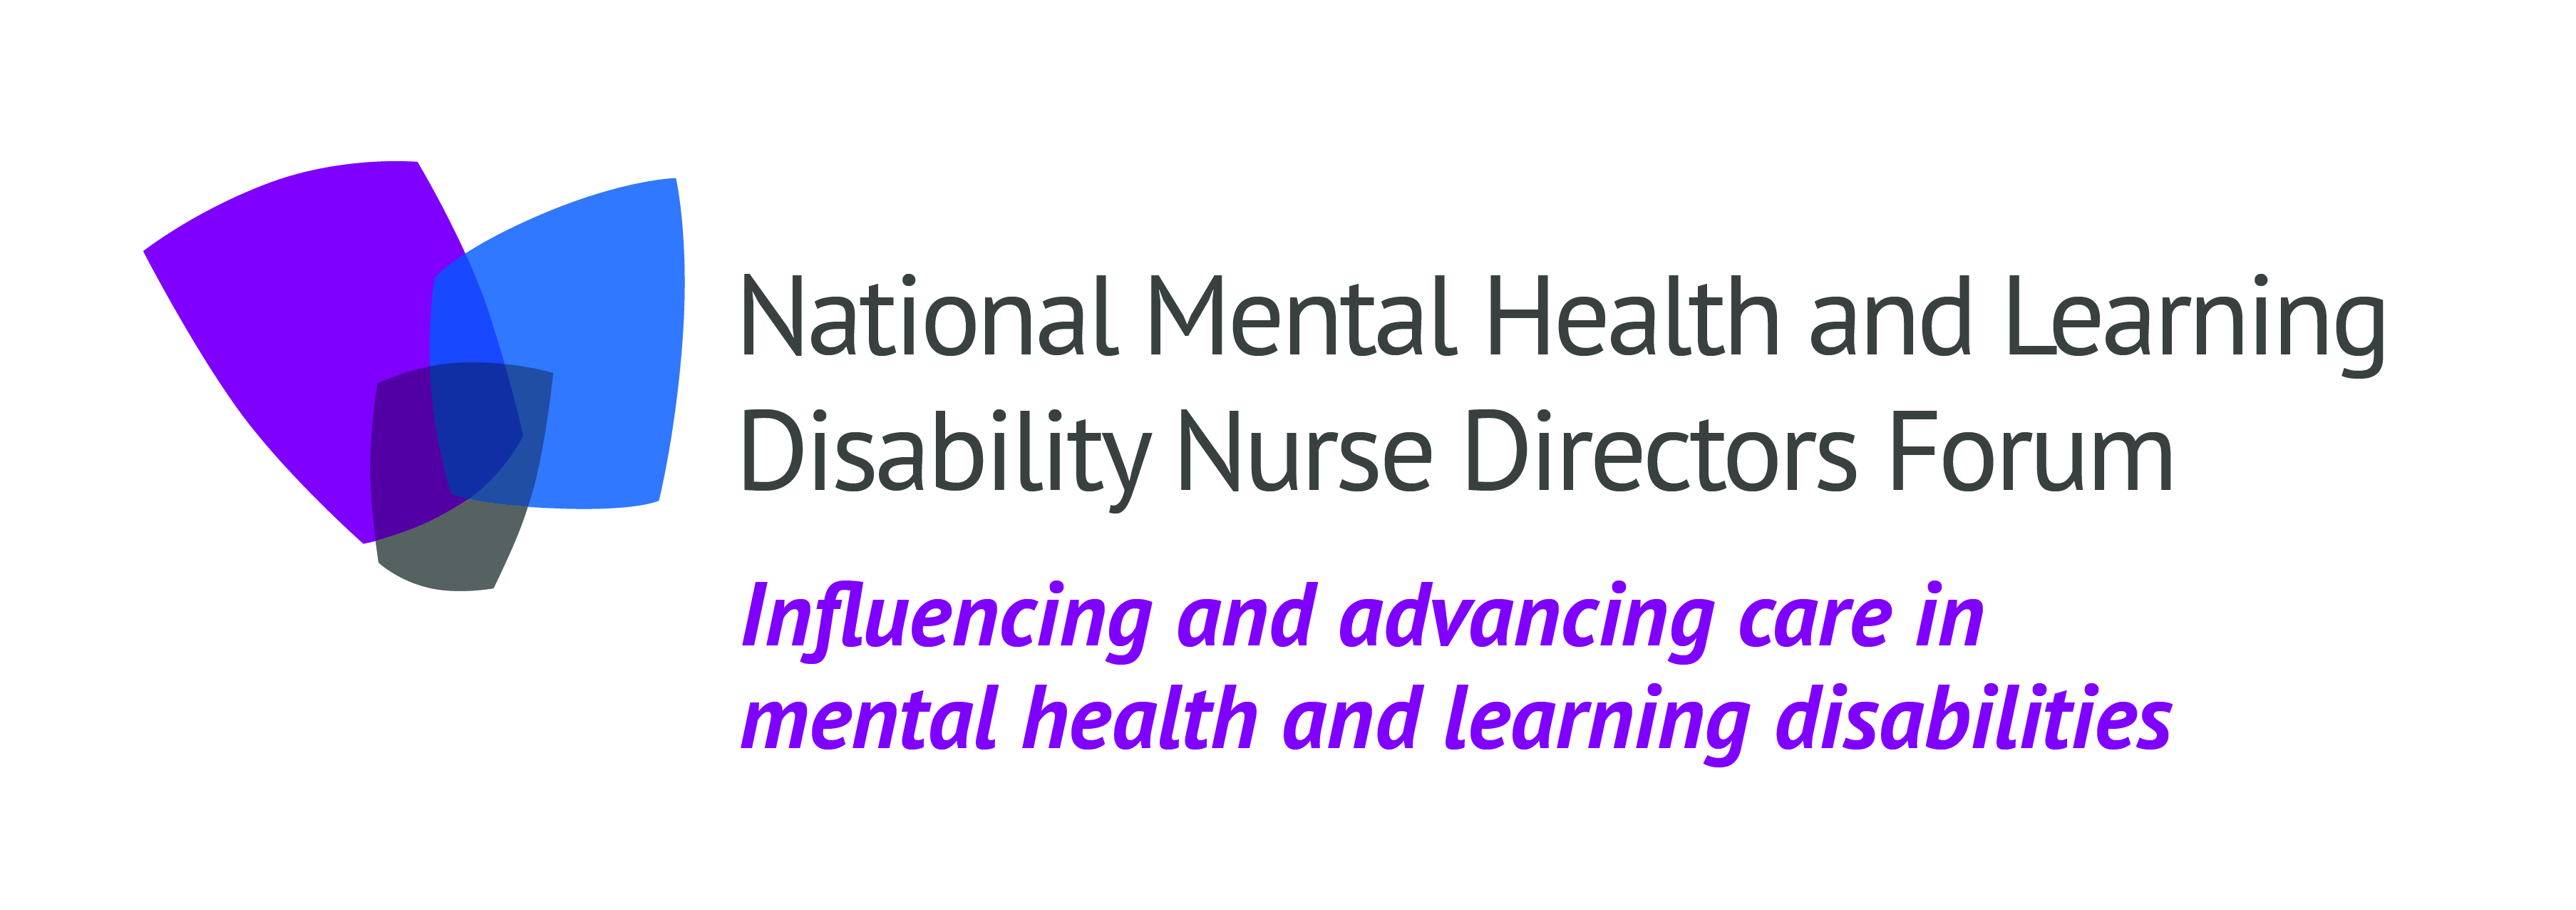 The Mental Health and Learning Disability Nurse Directors Forum